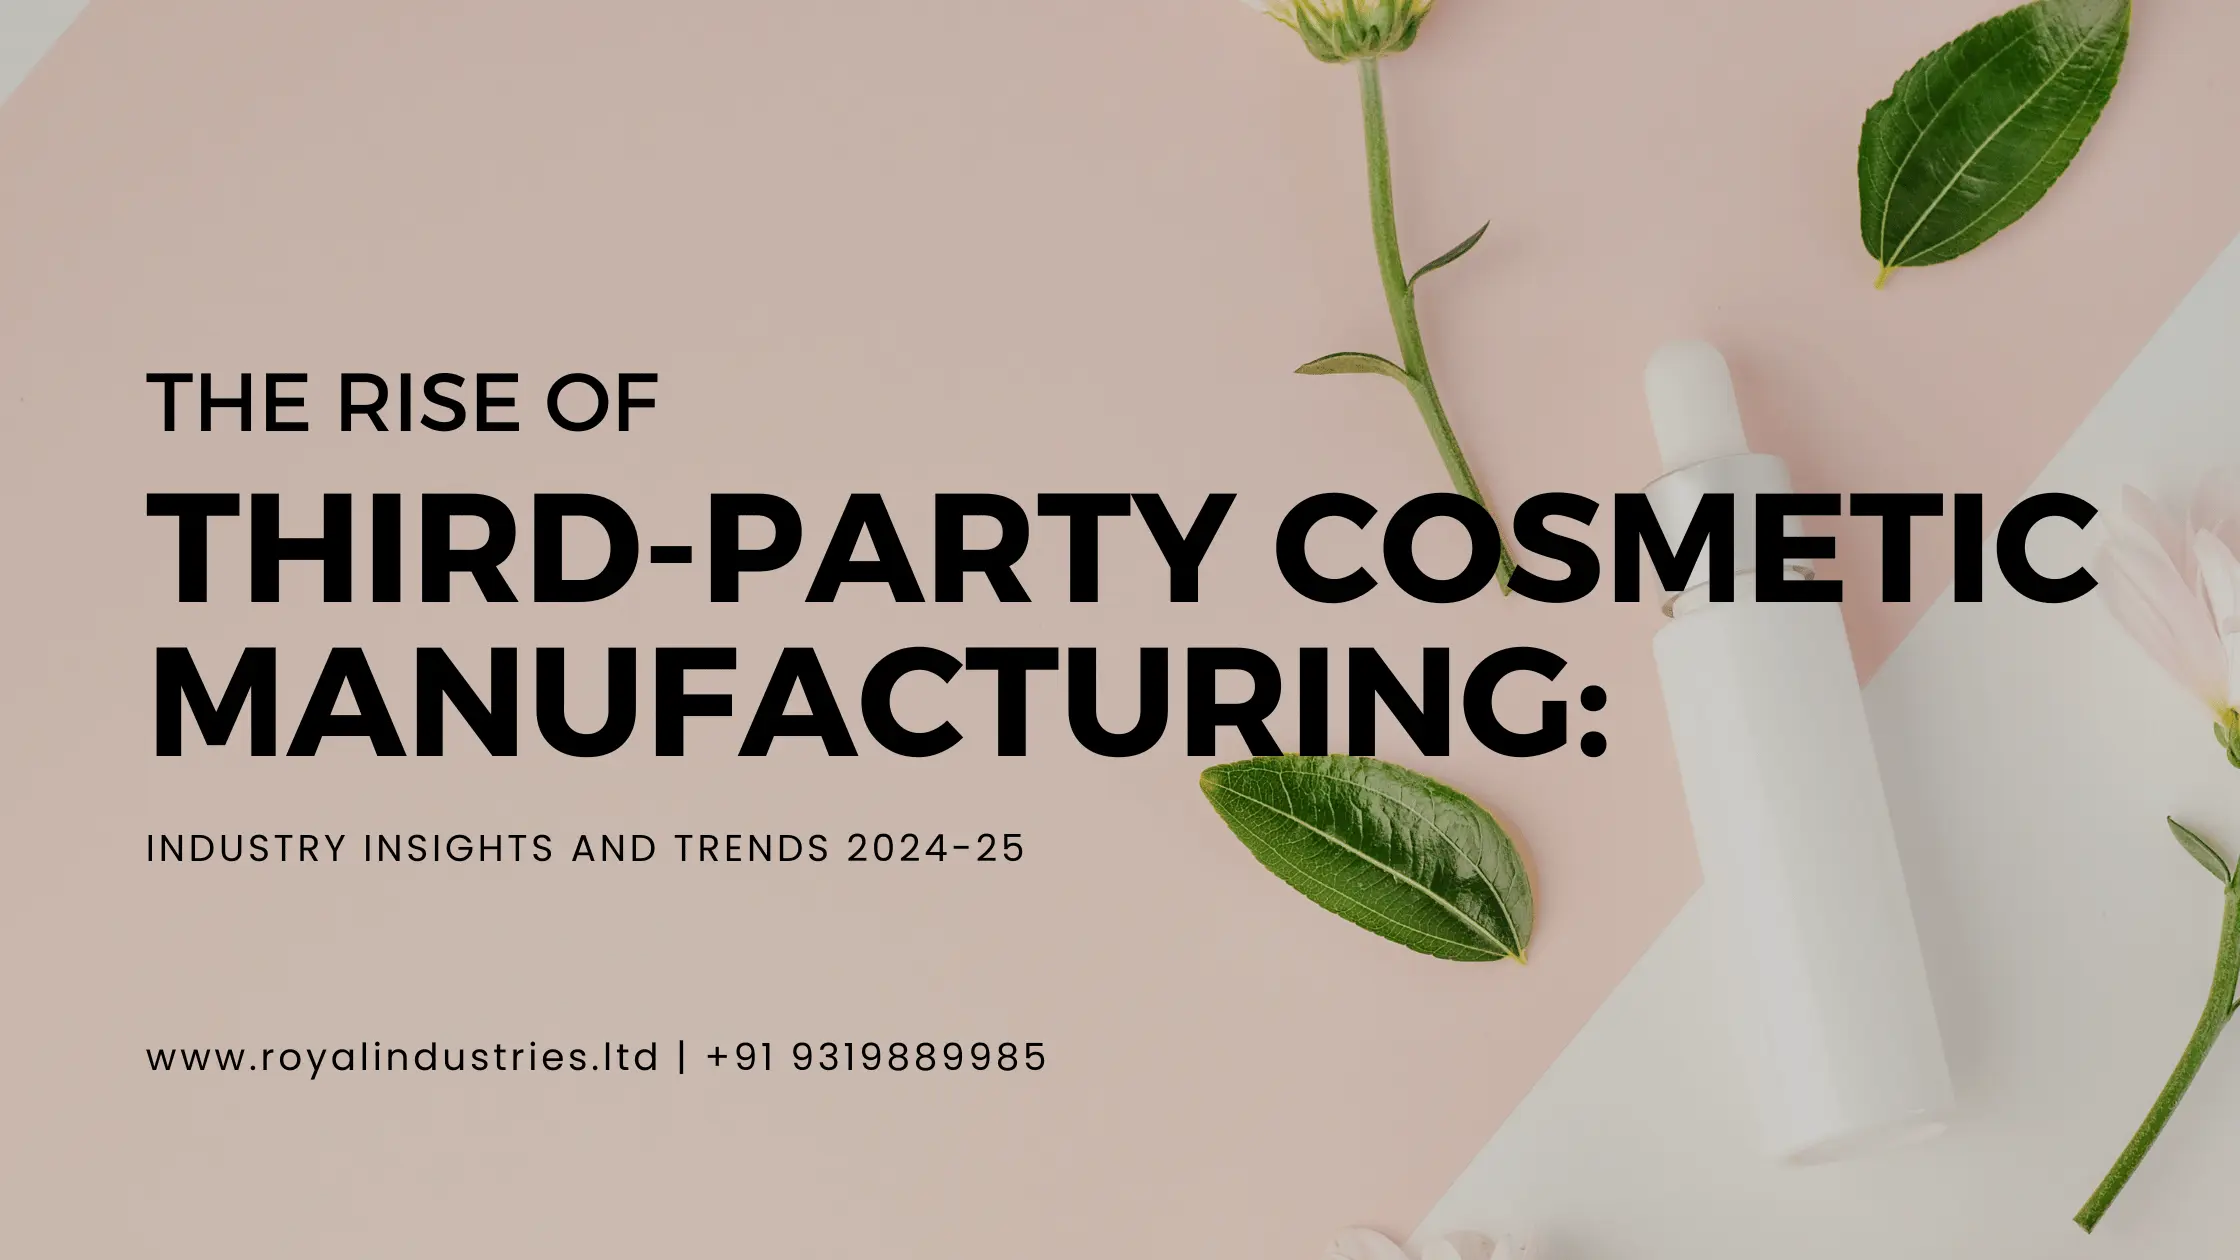 You are currently viewing The Rise of Third-Party Cosmetic Manufacturing: Industry Insights and Trends 2024-25